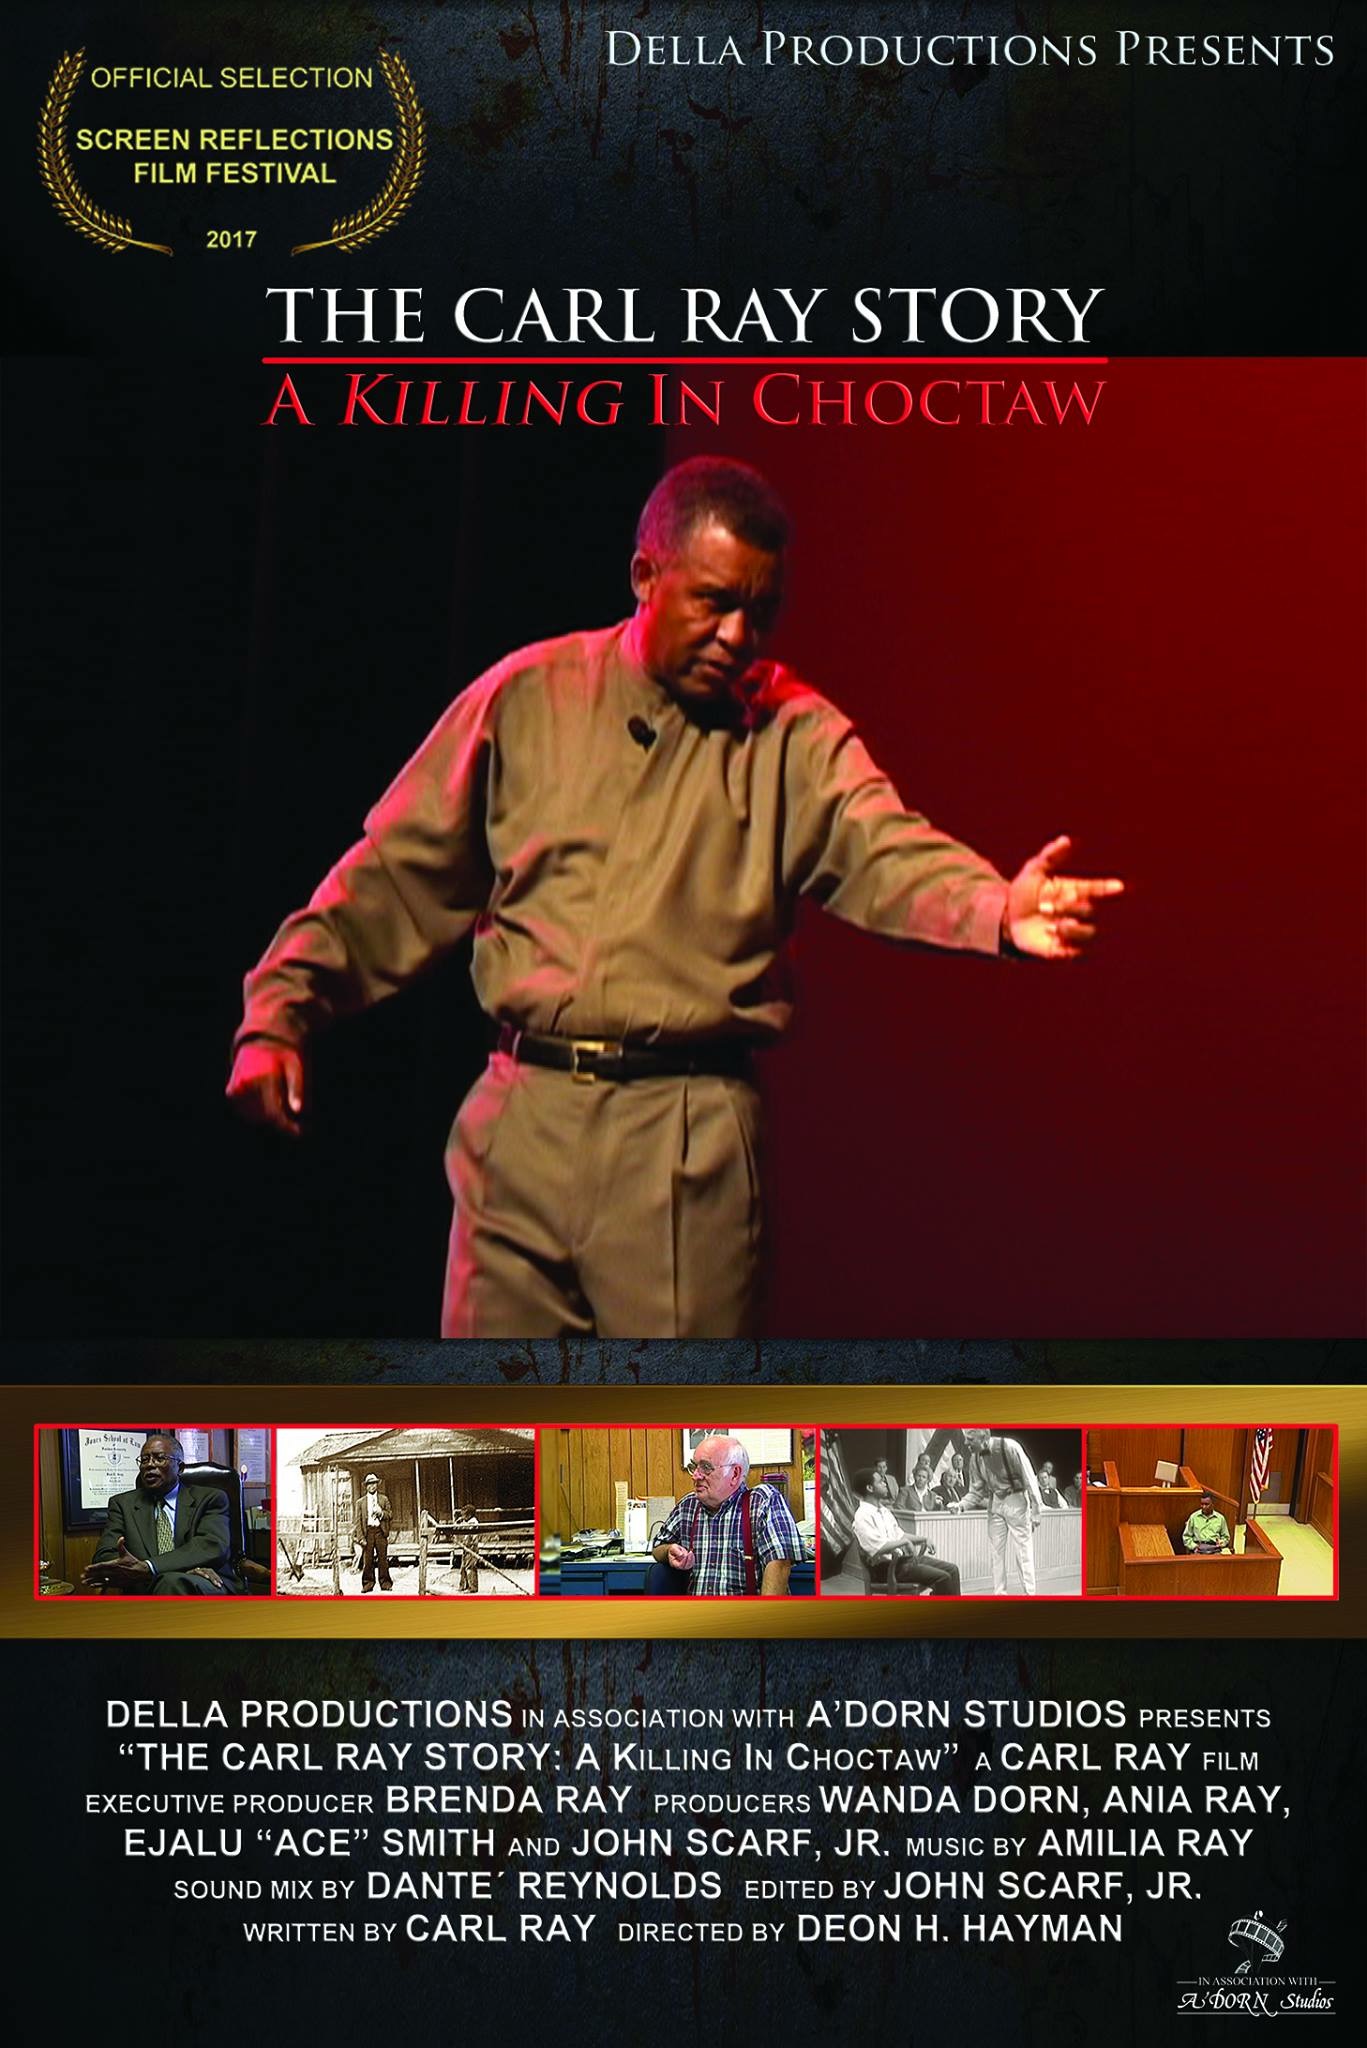 THE CARL RAY STORY: A Killing in Choctaw